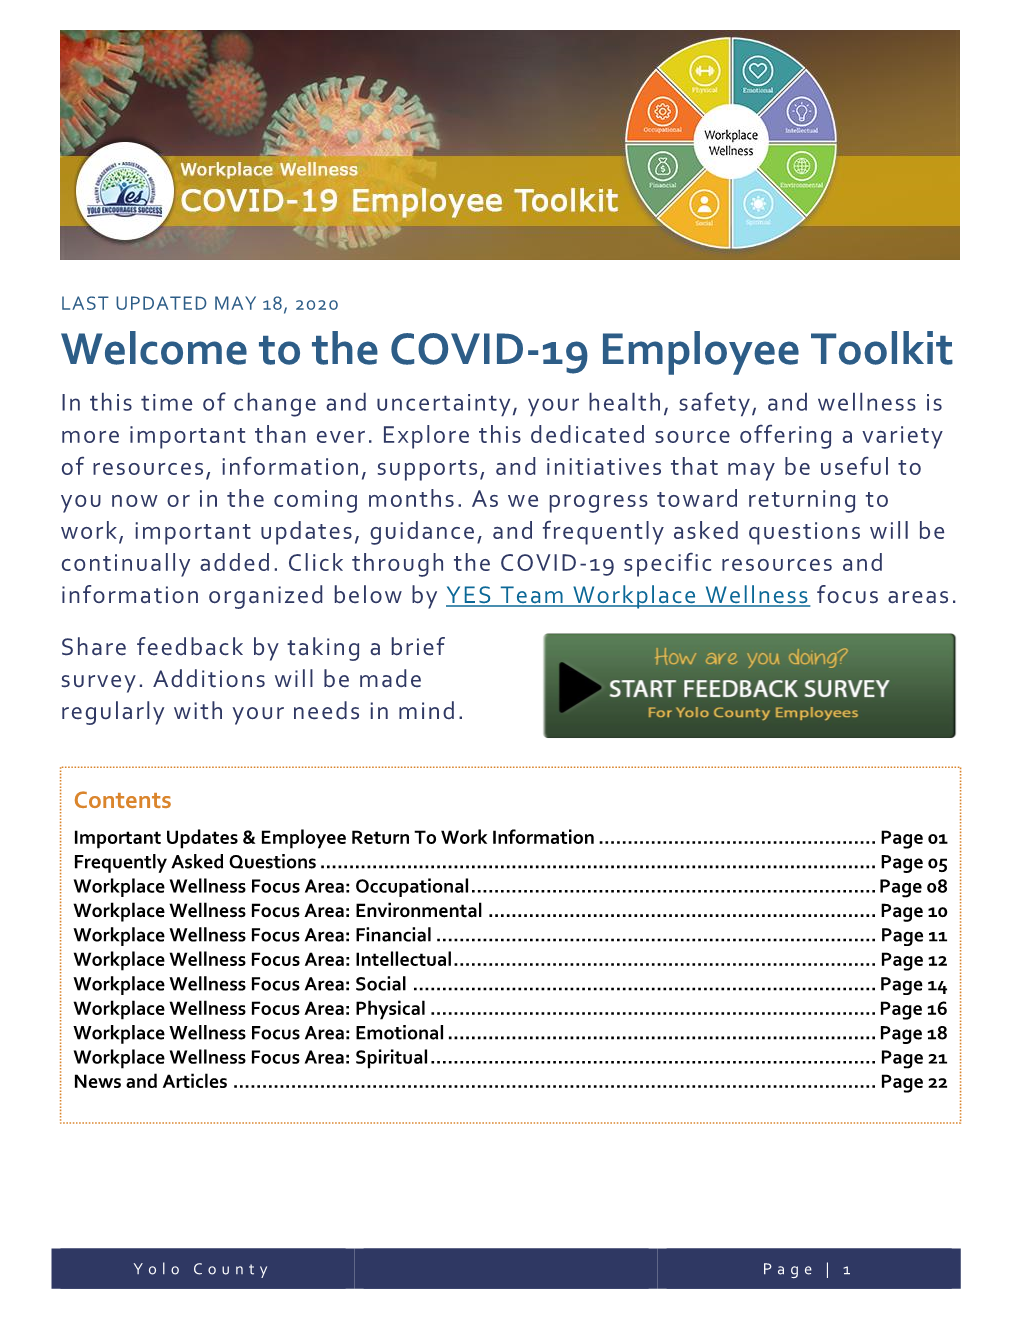 Welcome to the COVID-19 Employee Toolkit in This Time of Change and Uncertainty, Your Health, Safety, and Wellness Is More Important Than Ever